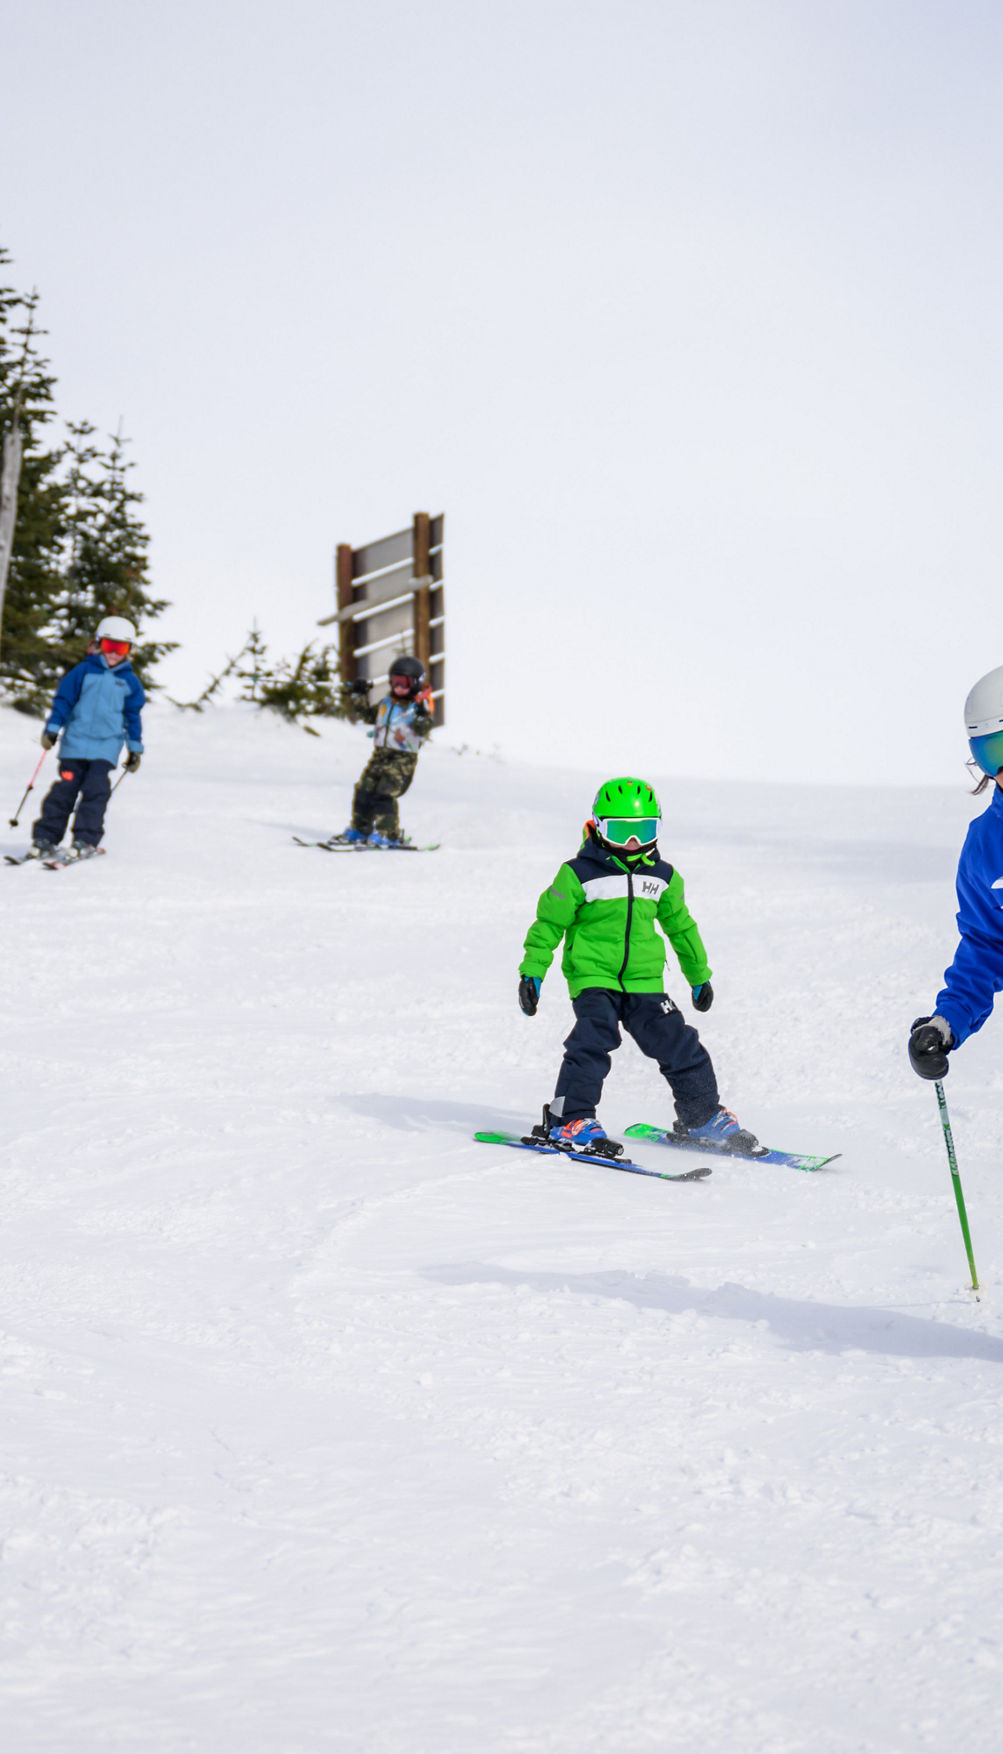 WHISTLER BLACKCOMB FOCUSES ON ALL THINGS KIDS - Snowboarder